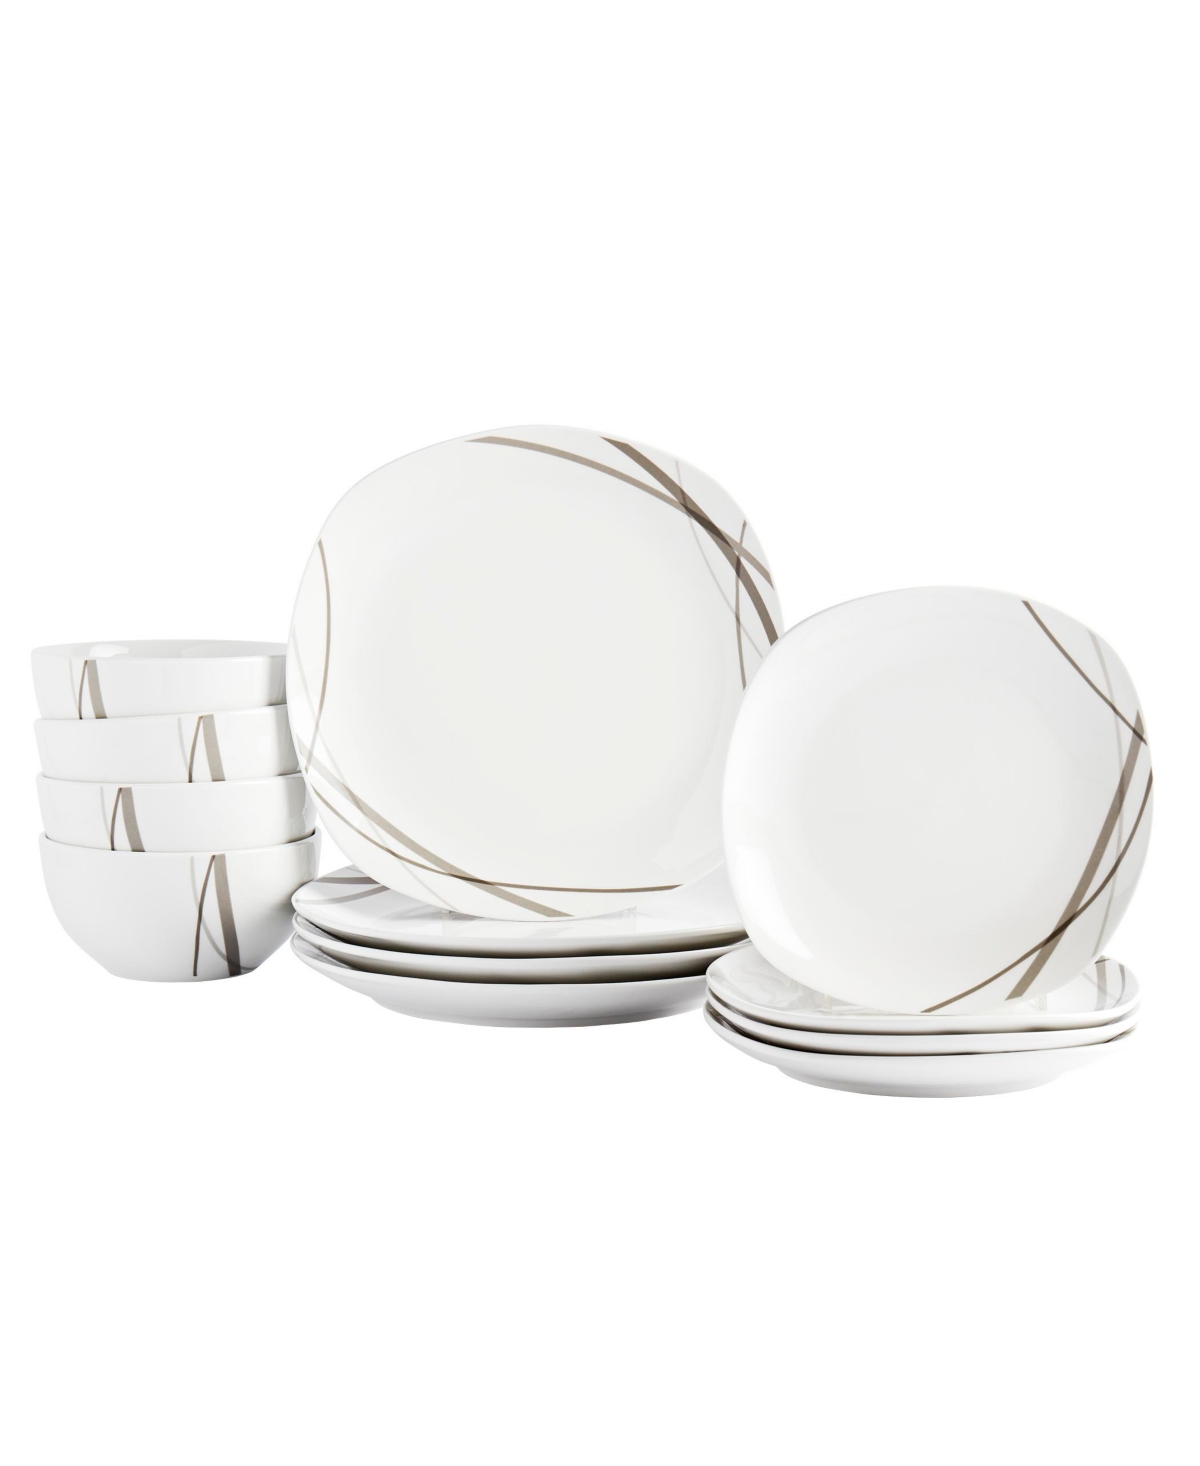 Curves Square 12-Pc Dinnerware Set, Service for 4 - White